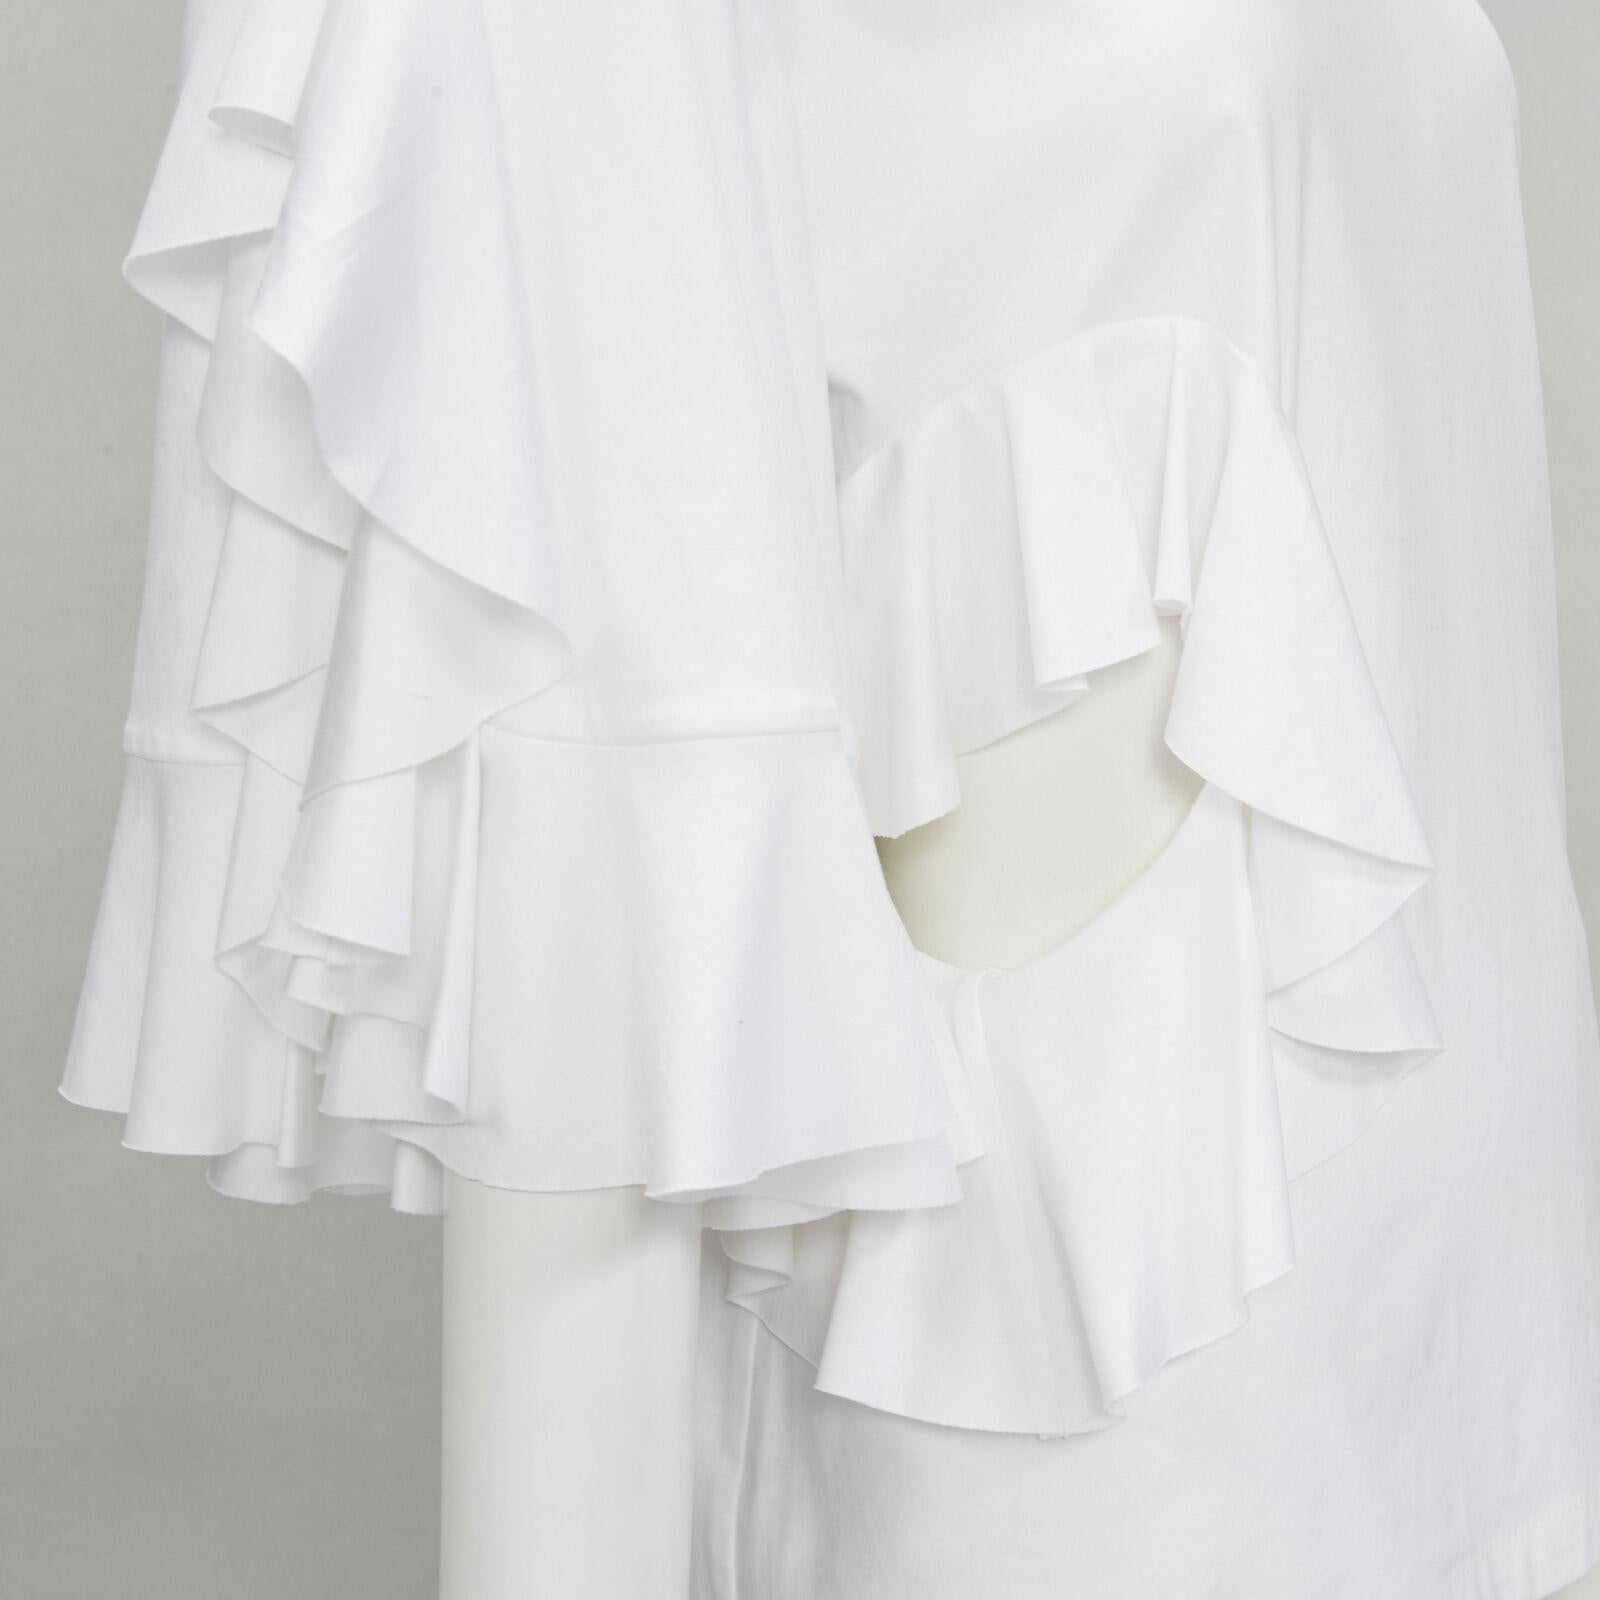 ELLERY white wide ruffle sleeves cut out side cotton tshirt US4 S
Reference: KNLM/A00035
Brand: Ellery
Material: Cotton
Color: White
Pattern: Solid
Closure: Zip
Extra Details: Zip along shoulder seam.
Made in: China

CONDITION:
Condition: Excellent,